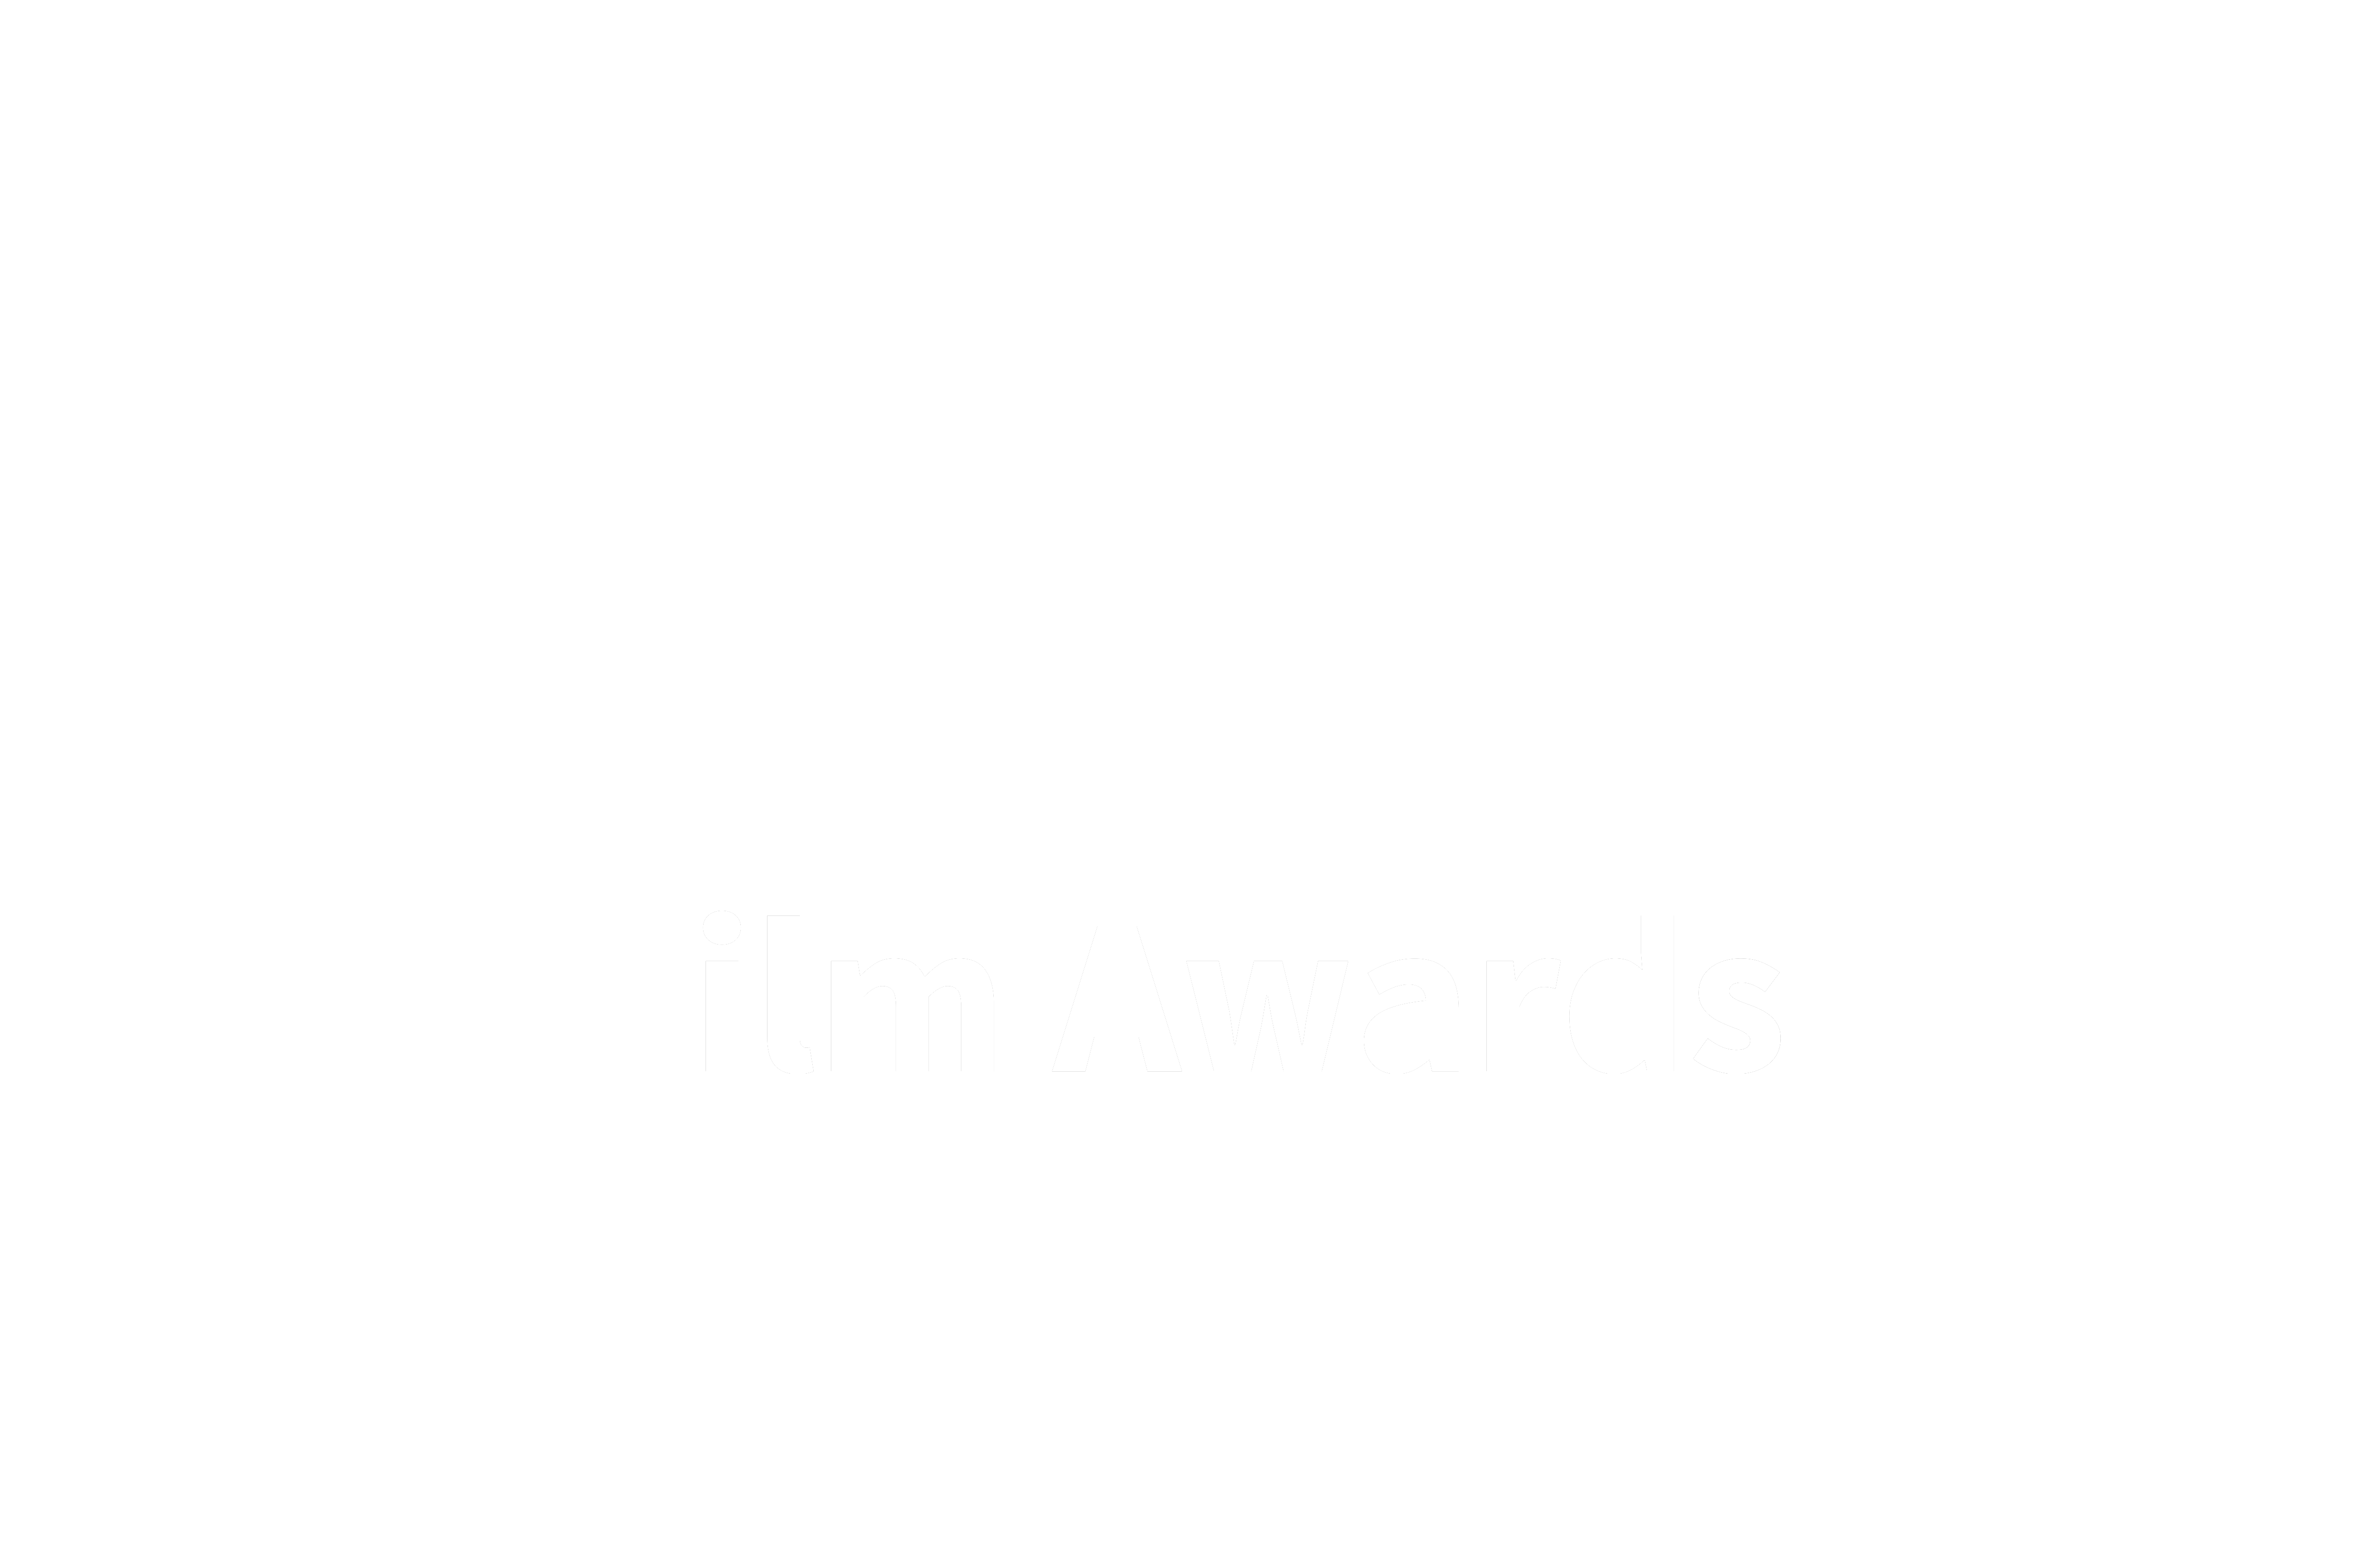 Boston Independent Film Awards 2021 OFFICIAL SELECTION